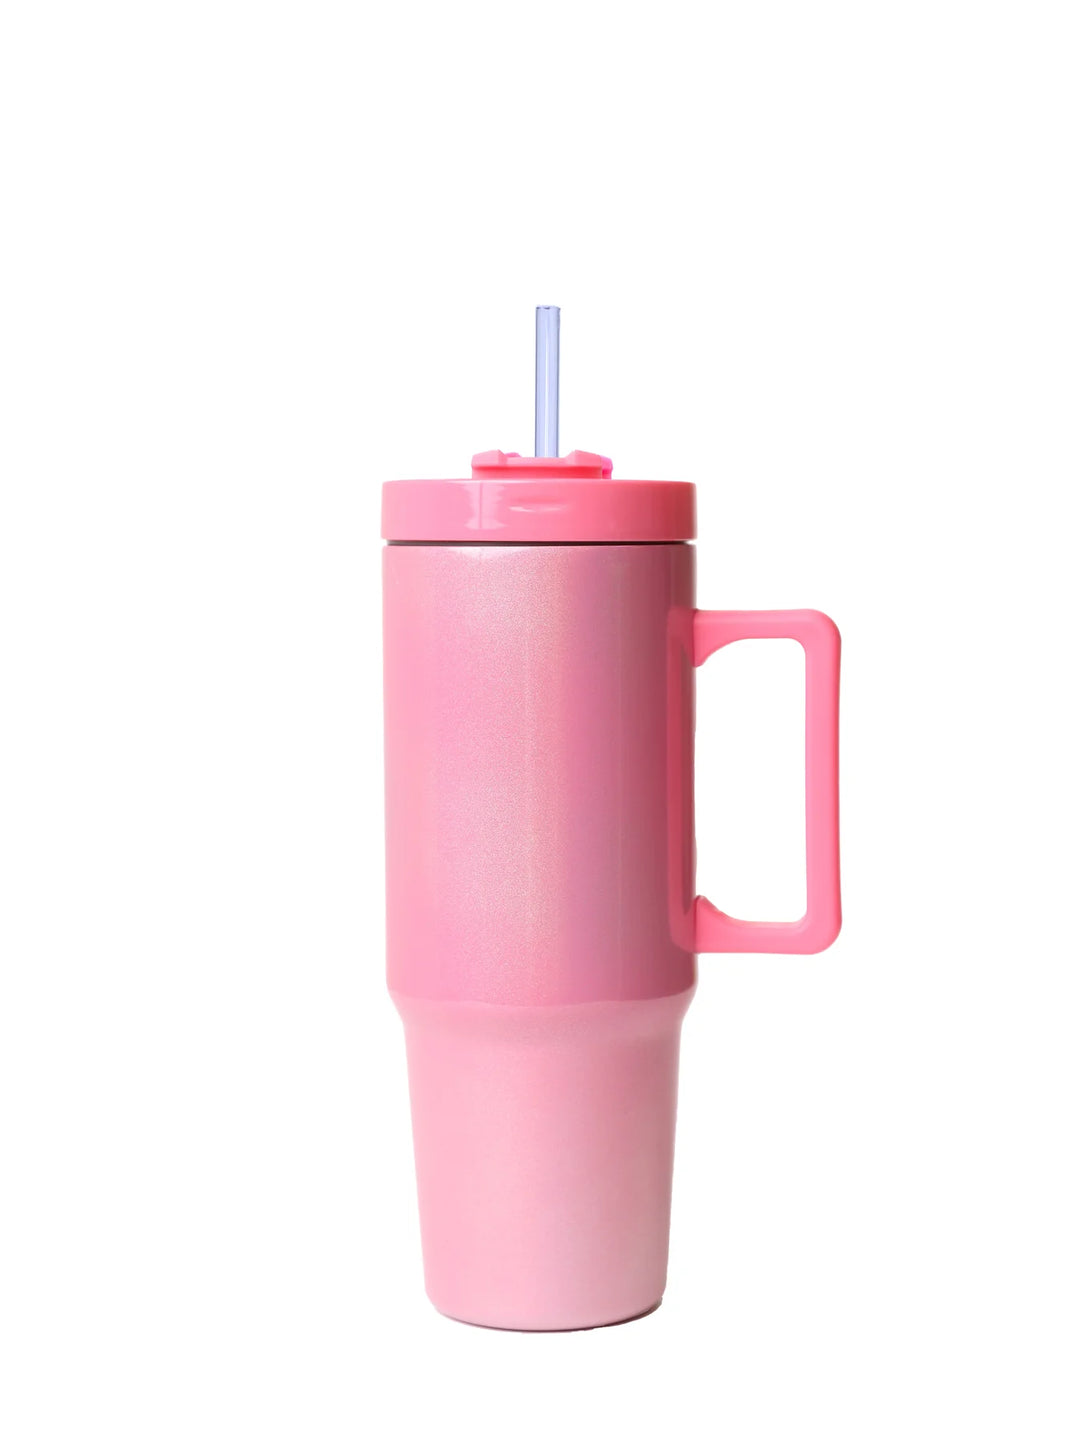 PEARLIZED PINK TO-GO HANDLED TUMBLER